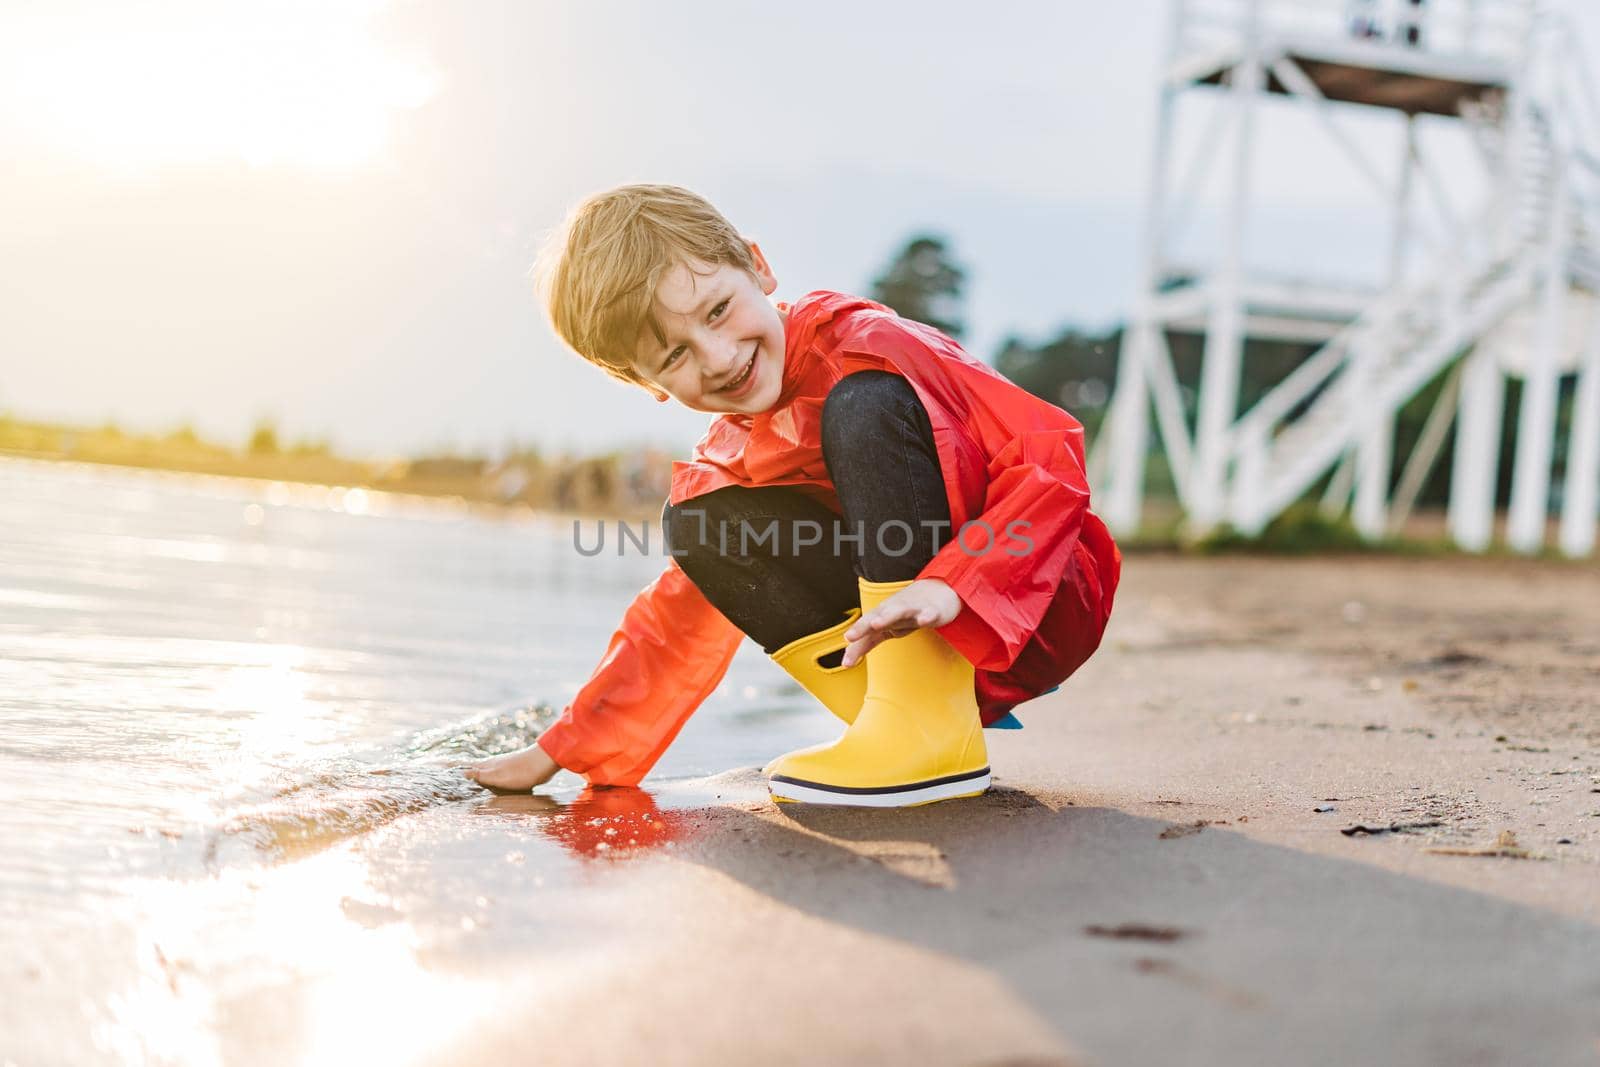 Boy in a red raincoat and yellow rubber boots playing with water at the beach. School kid in a waterproof coat touching water at sea. Child having fun with waves at the shore.